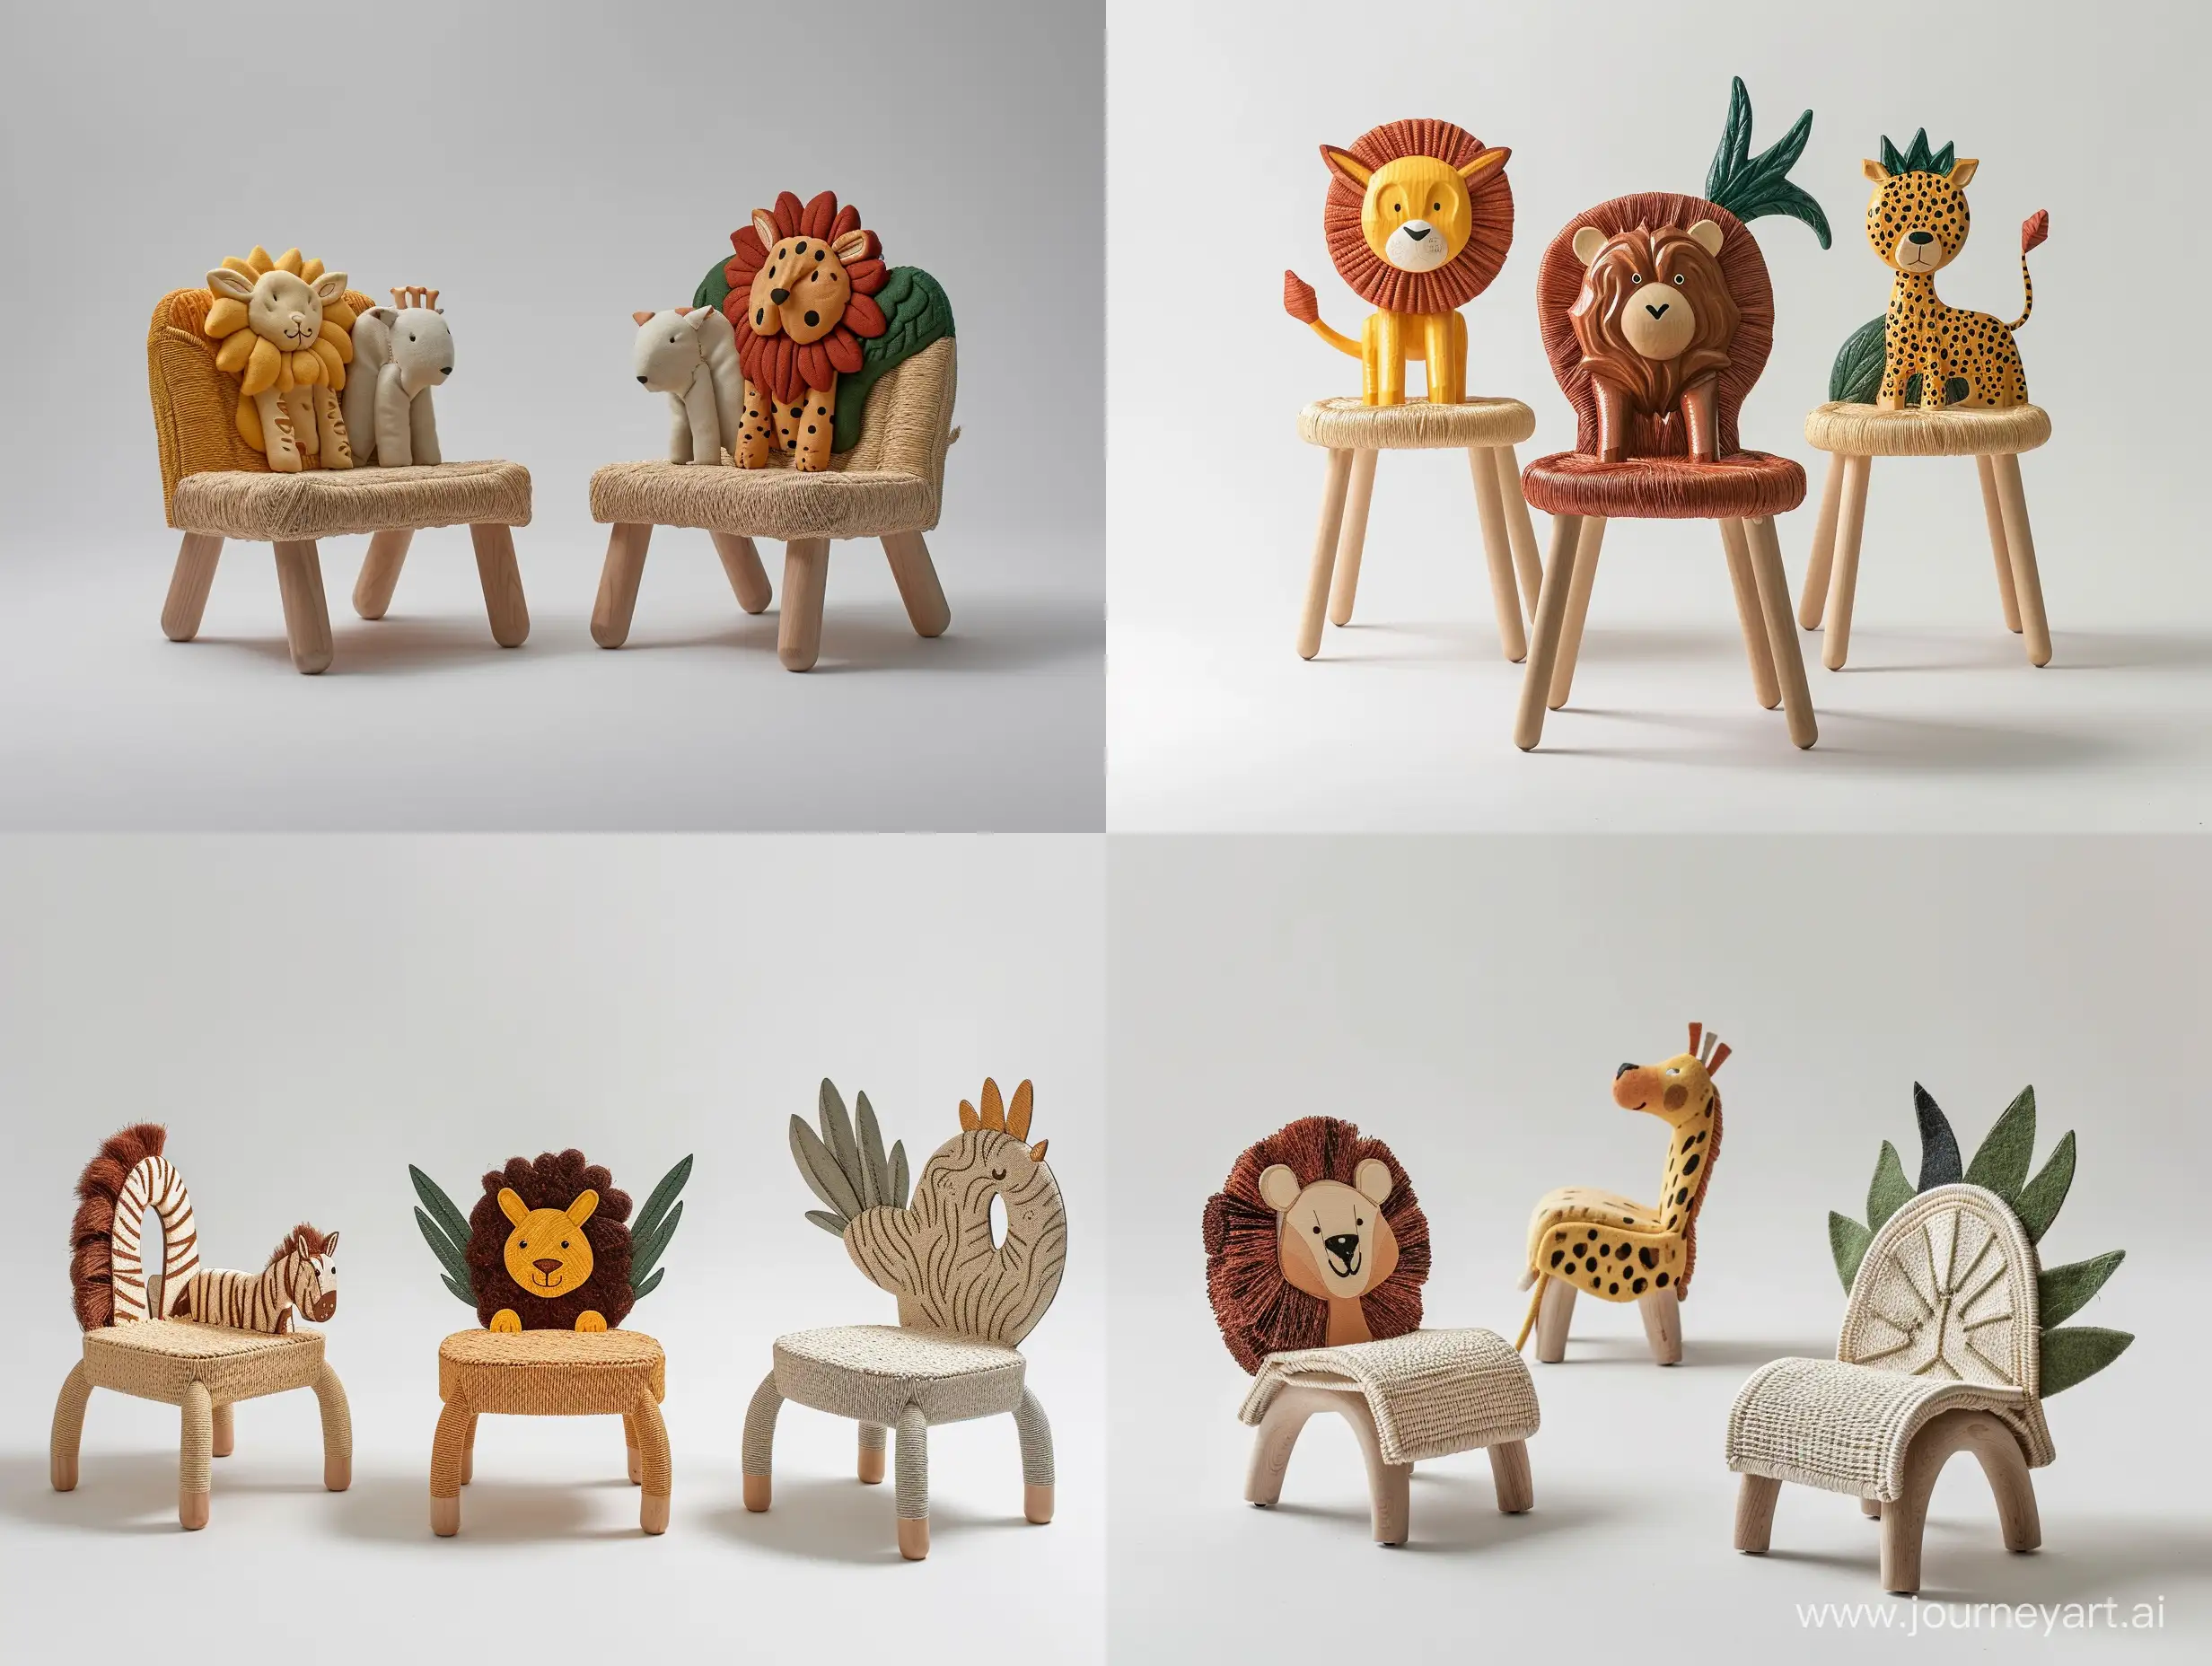 imagine an image of a minimal sturdy children’s  chair inspired by Children's drawing of cute safari animals like cute lion or zebra or griffin or cheetah or hippocampus , with backrests shaped like different creatures. Use recycled wood for the frame and woven plant fibers for seating areas, depicted in colors representative of the chosen animals. The seat should stand approximately 30cm tall, built to educate about wildlife and ensure durability.unreal ,realistic style